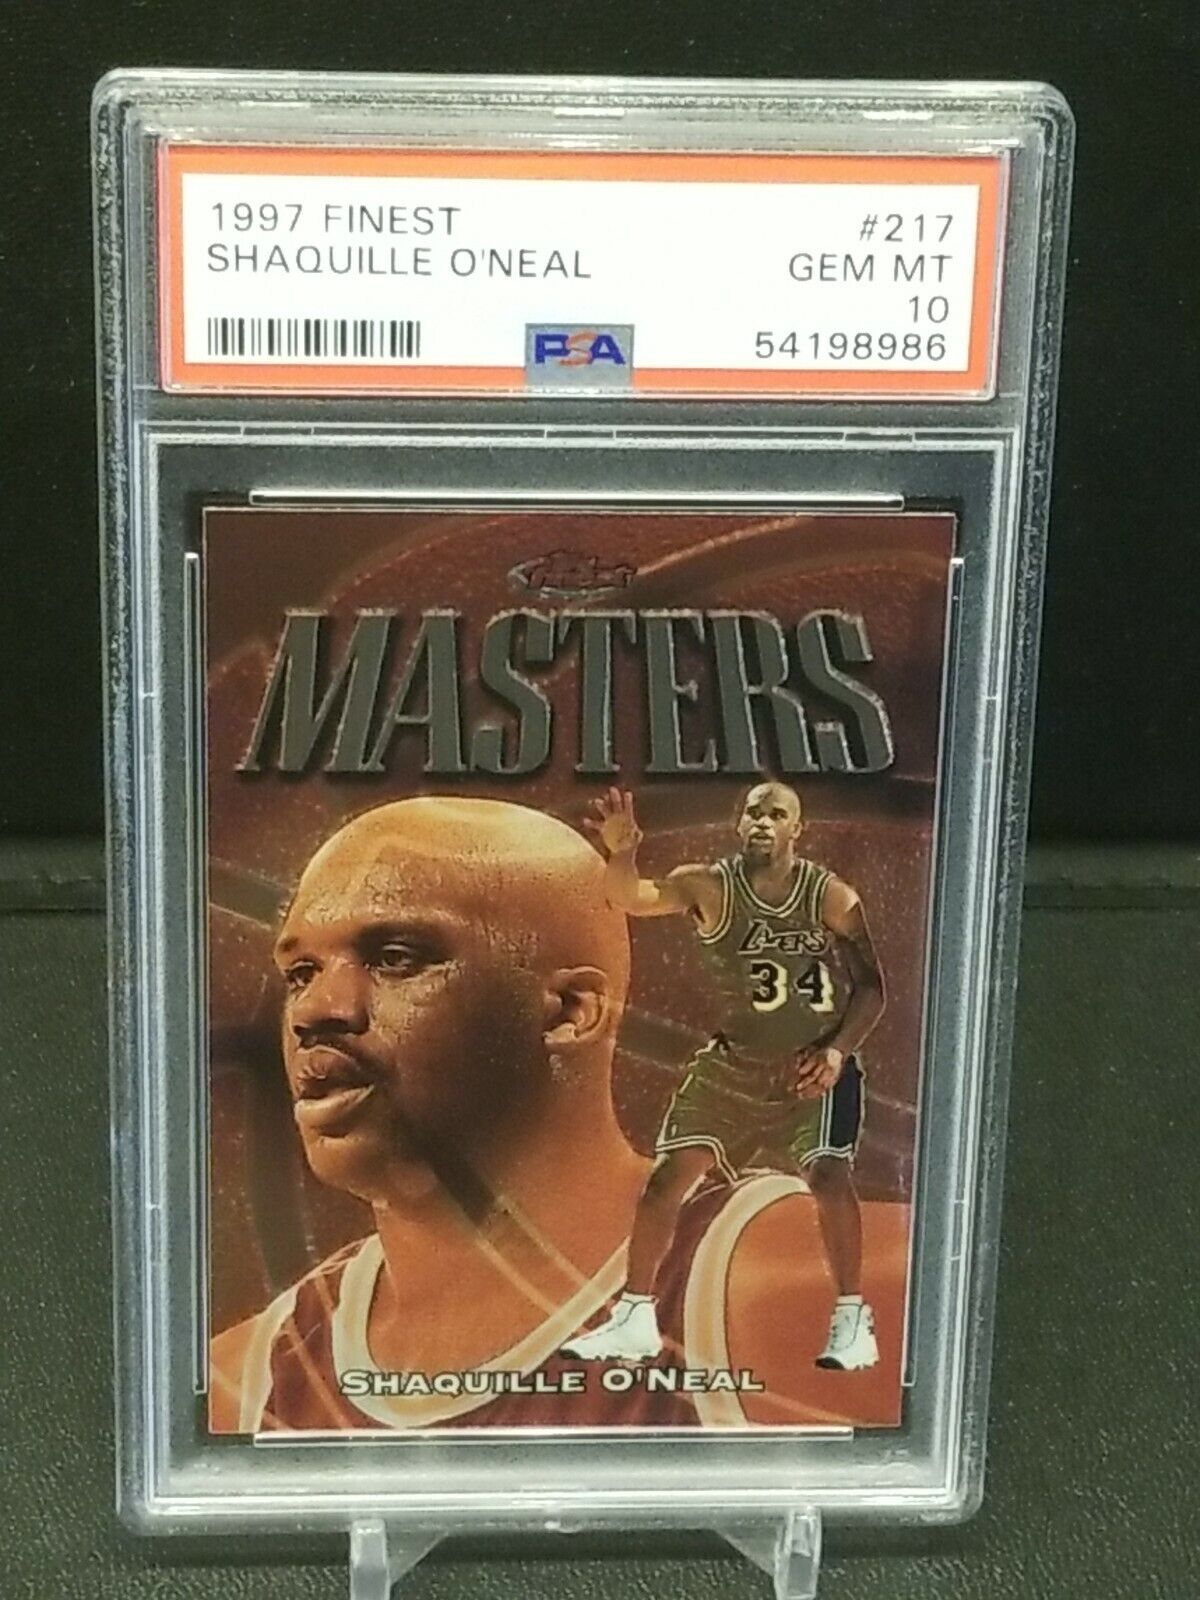 SHAQUILLE O'NEAL 1997 FINEST #217 PSA 10 NEW PSA LABEL